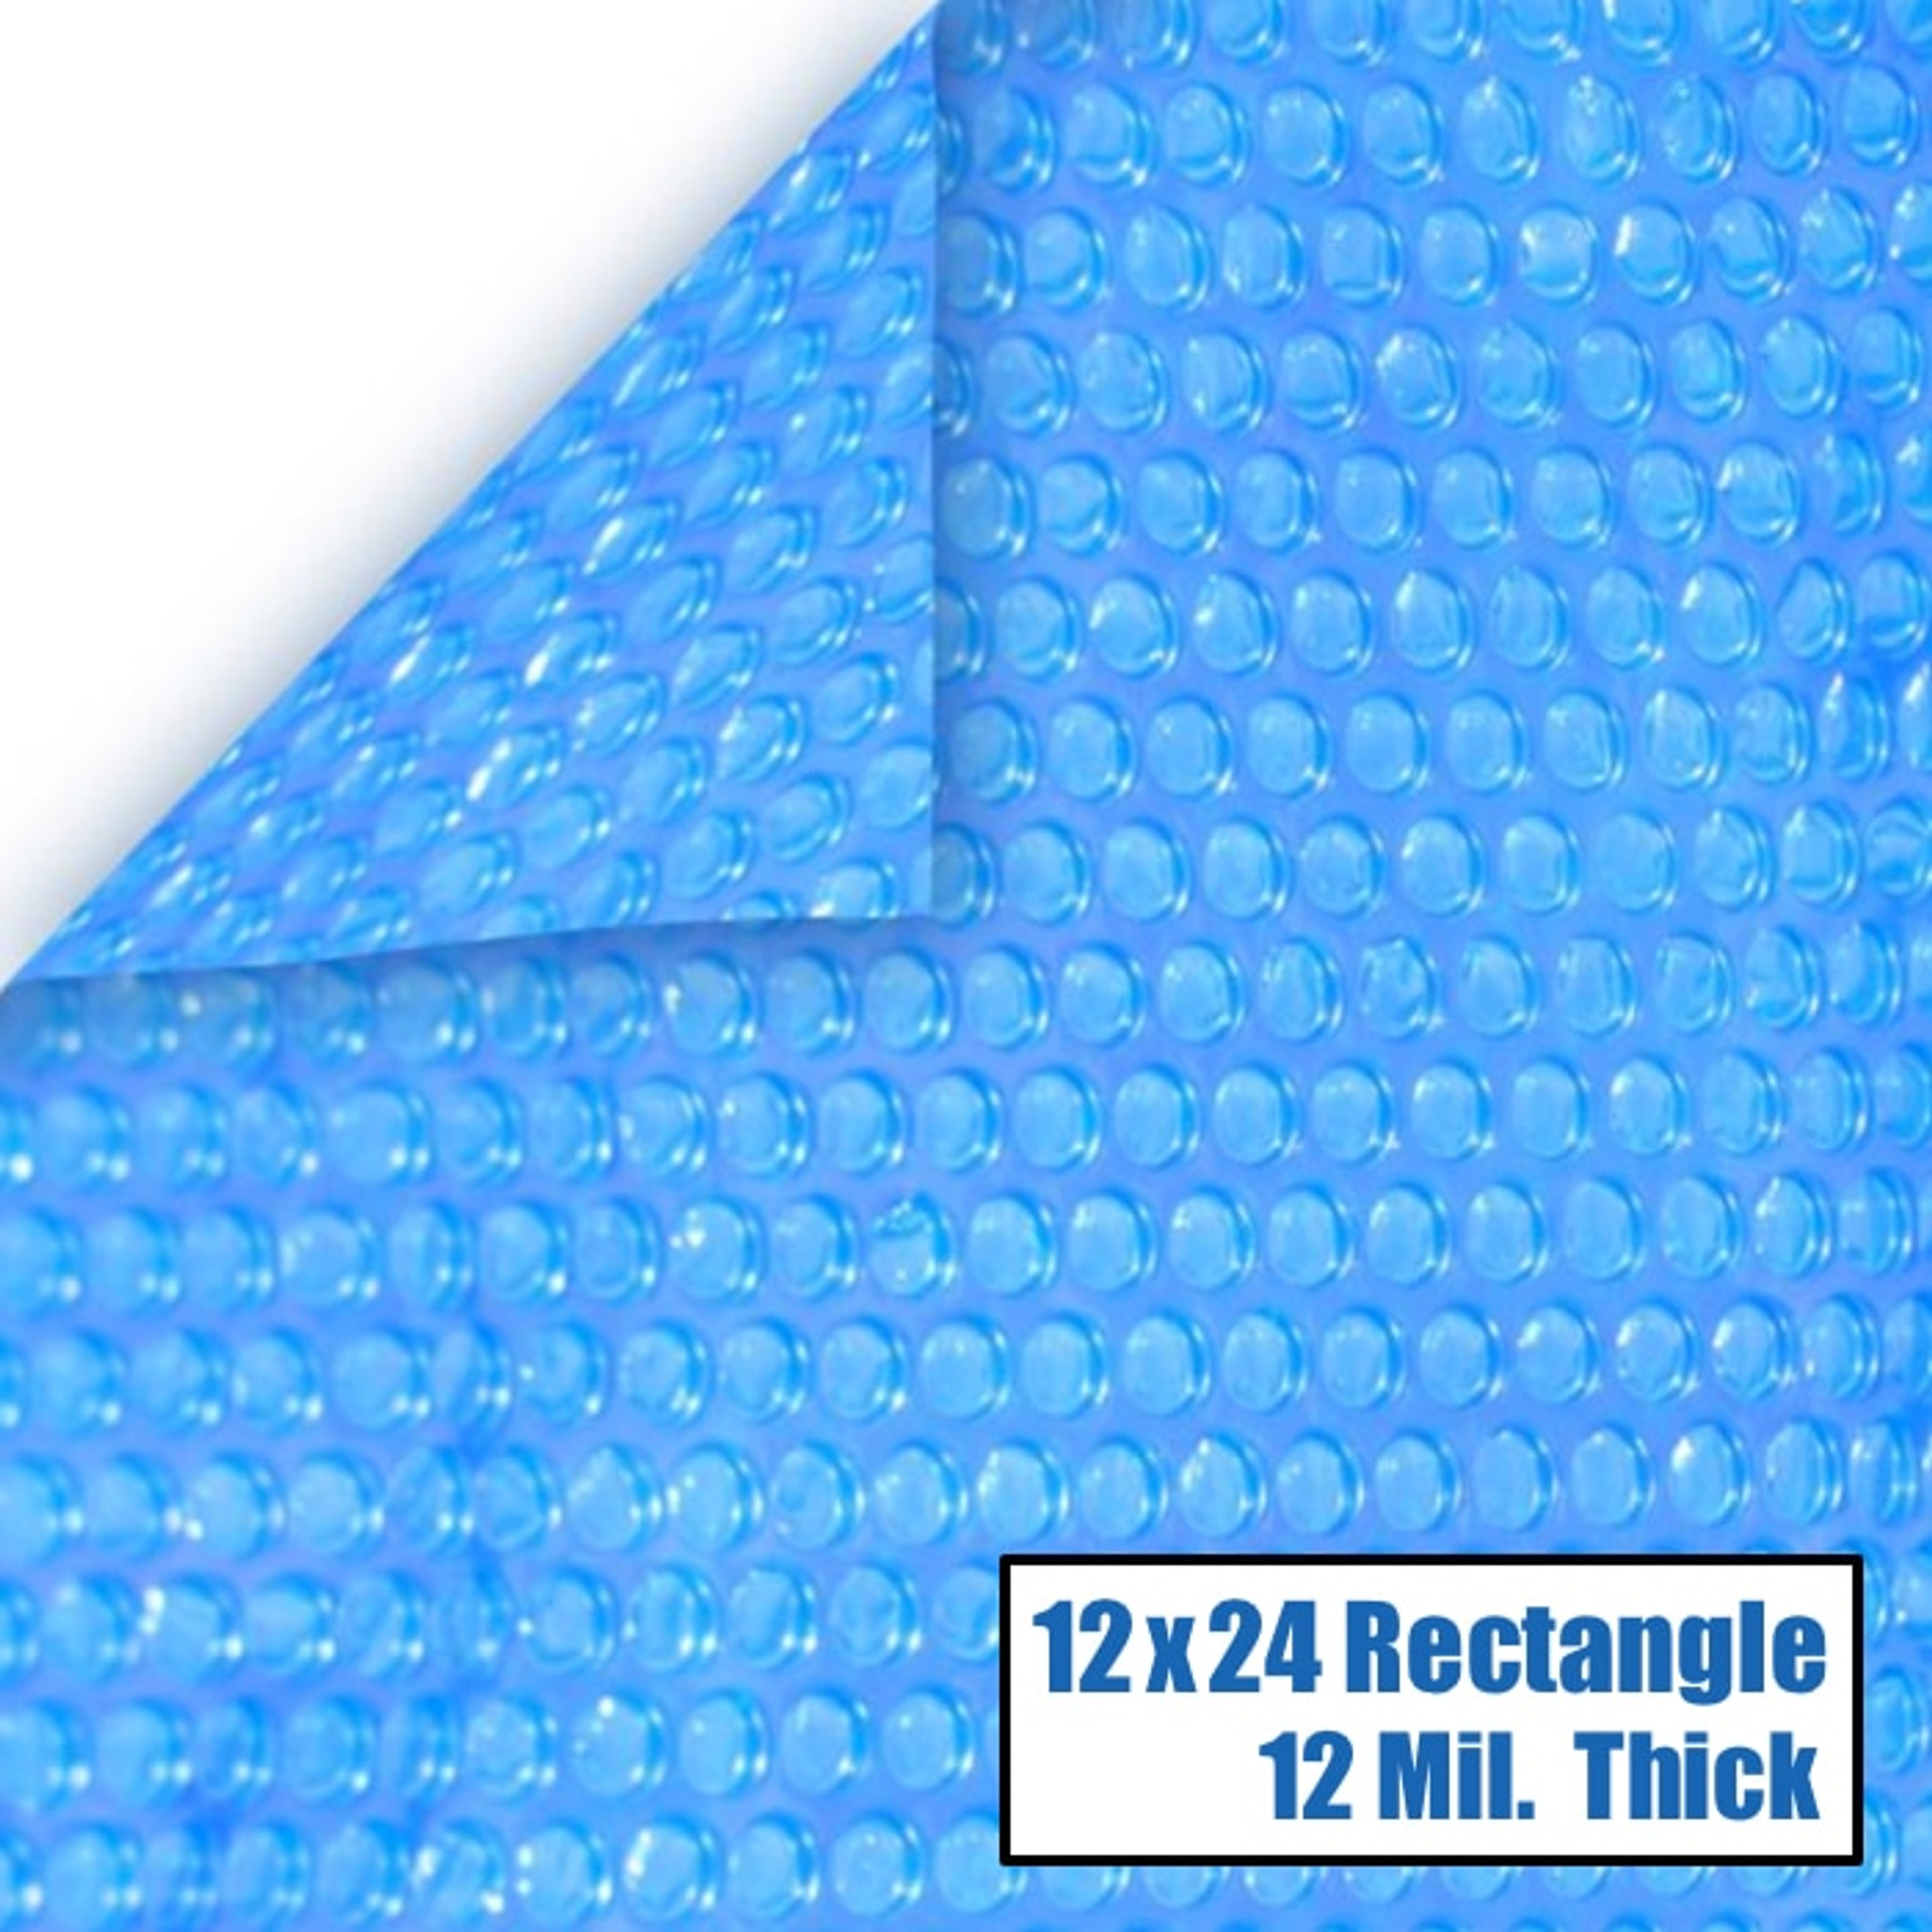 12' x 24' Rectangle Blue Solar Cover 12 Mil 5 Year Warranty Pool Supply Mall